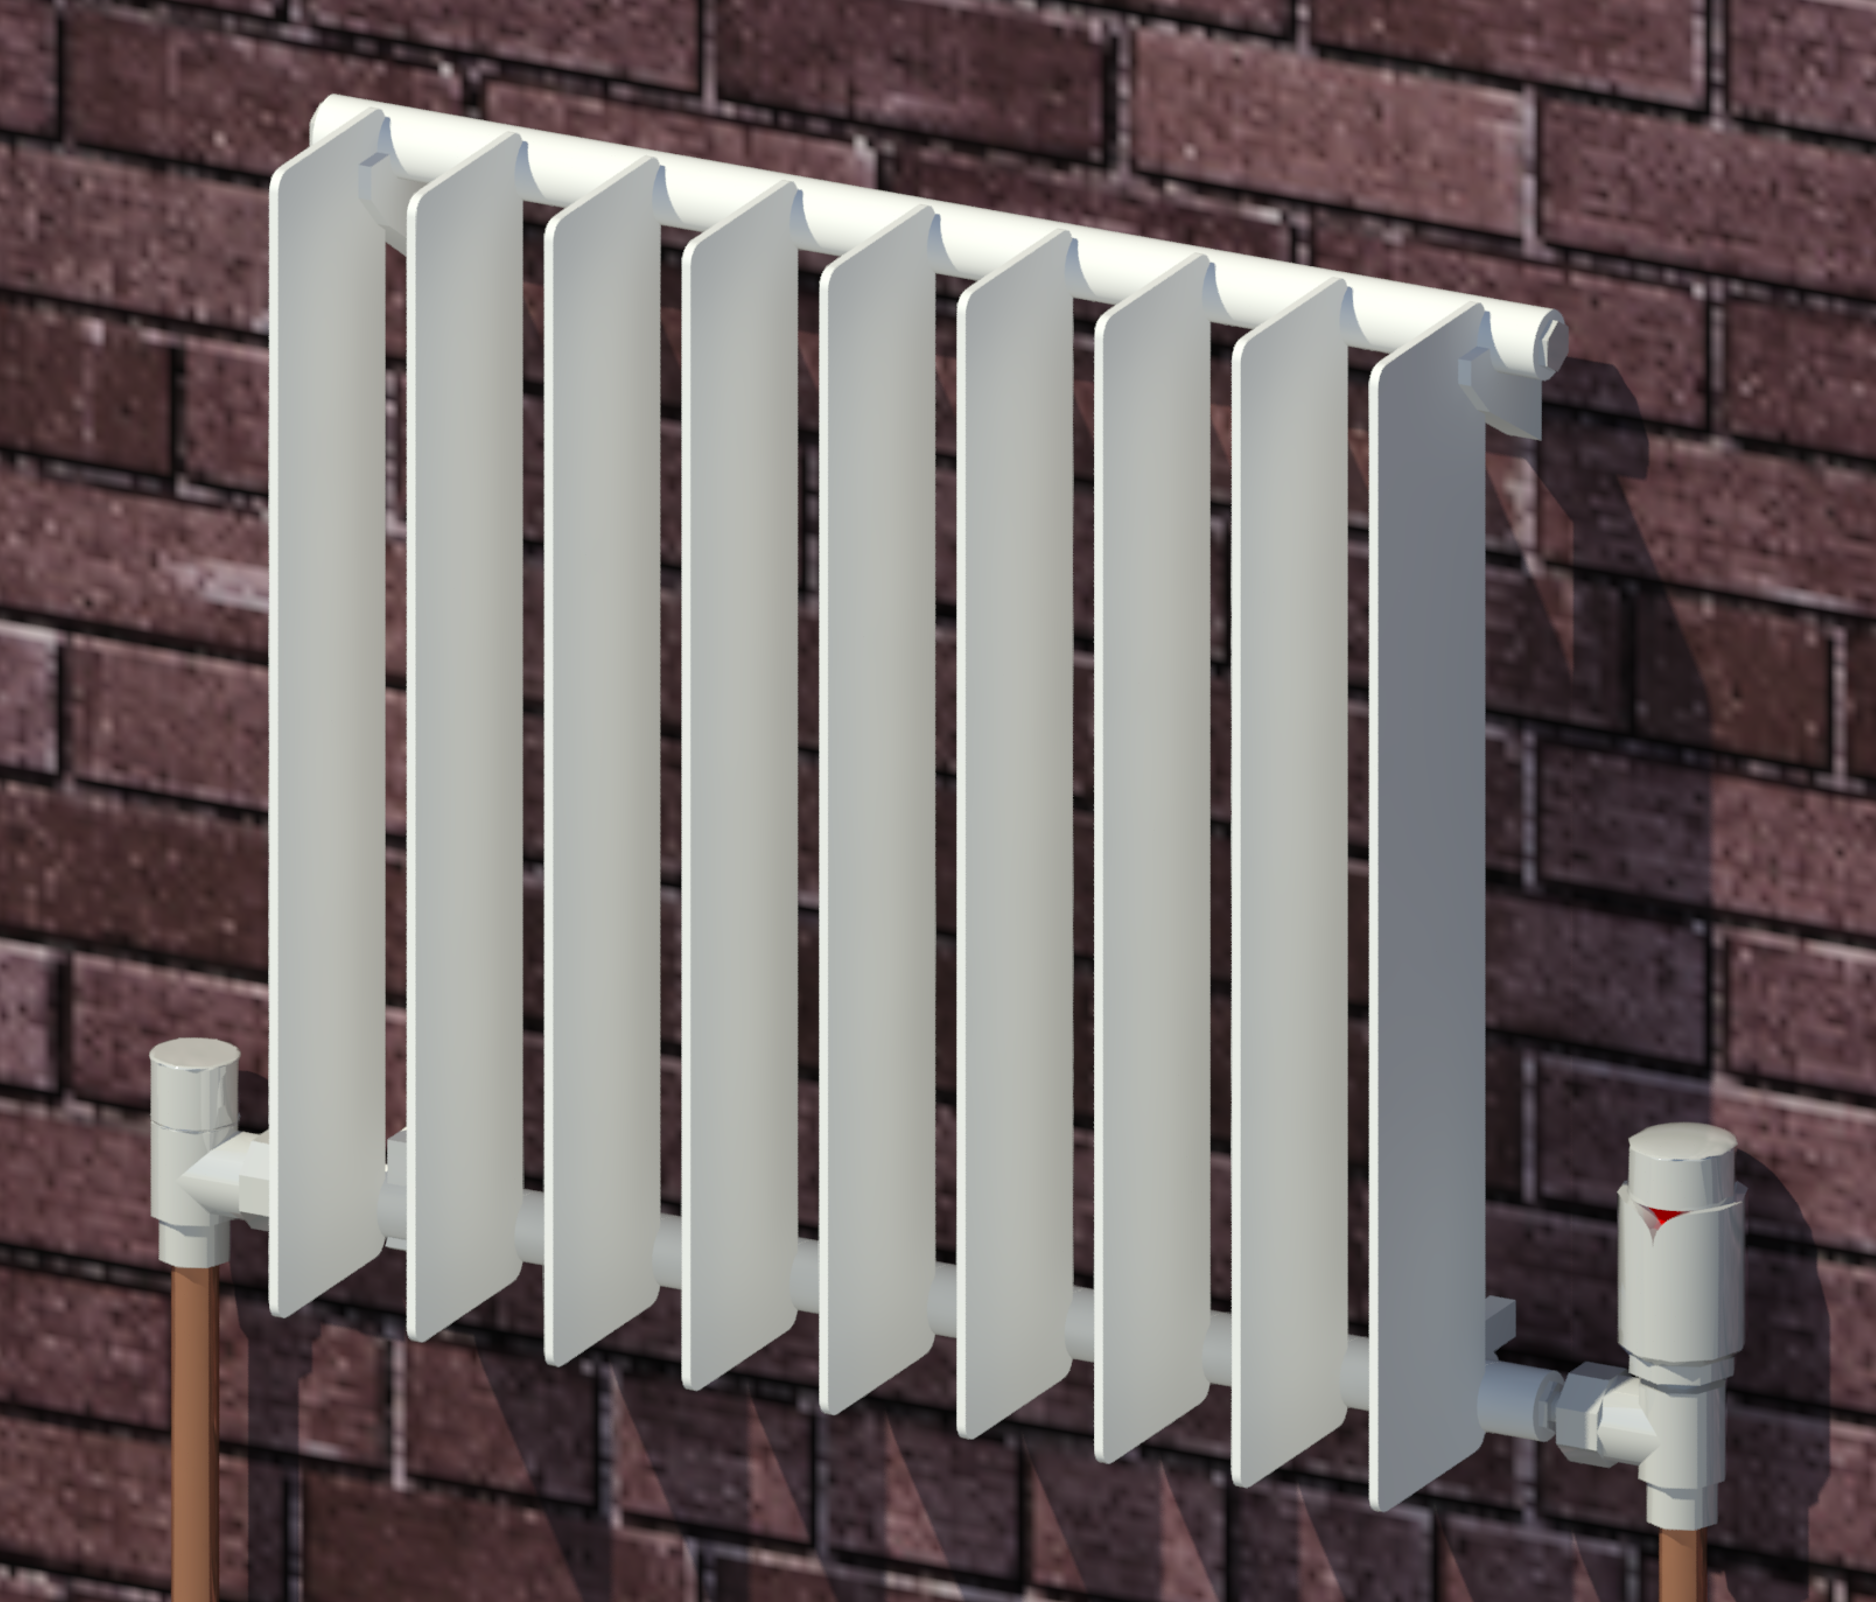 Revit raytrace showing Runtal radiator and connected valves.